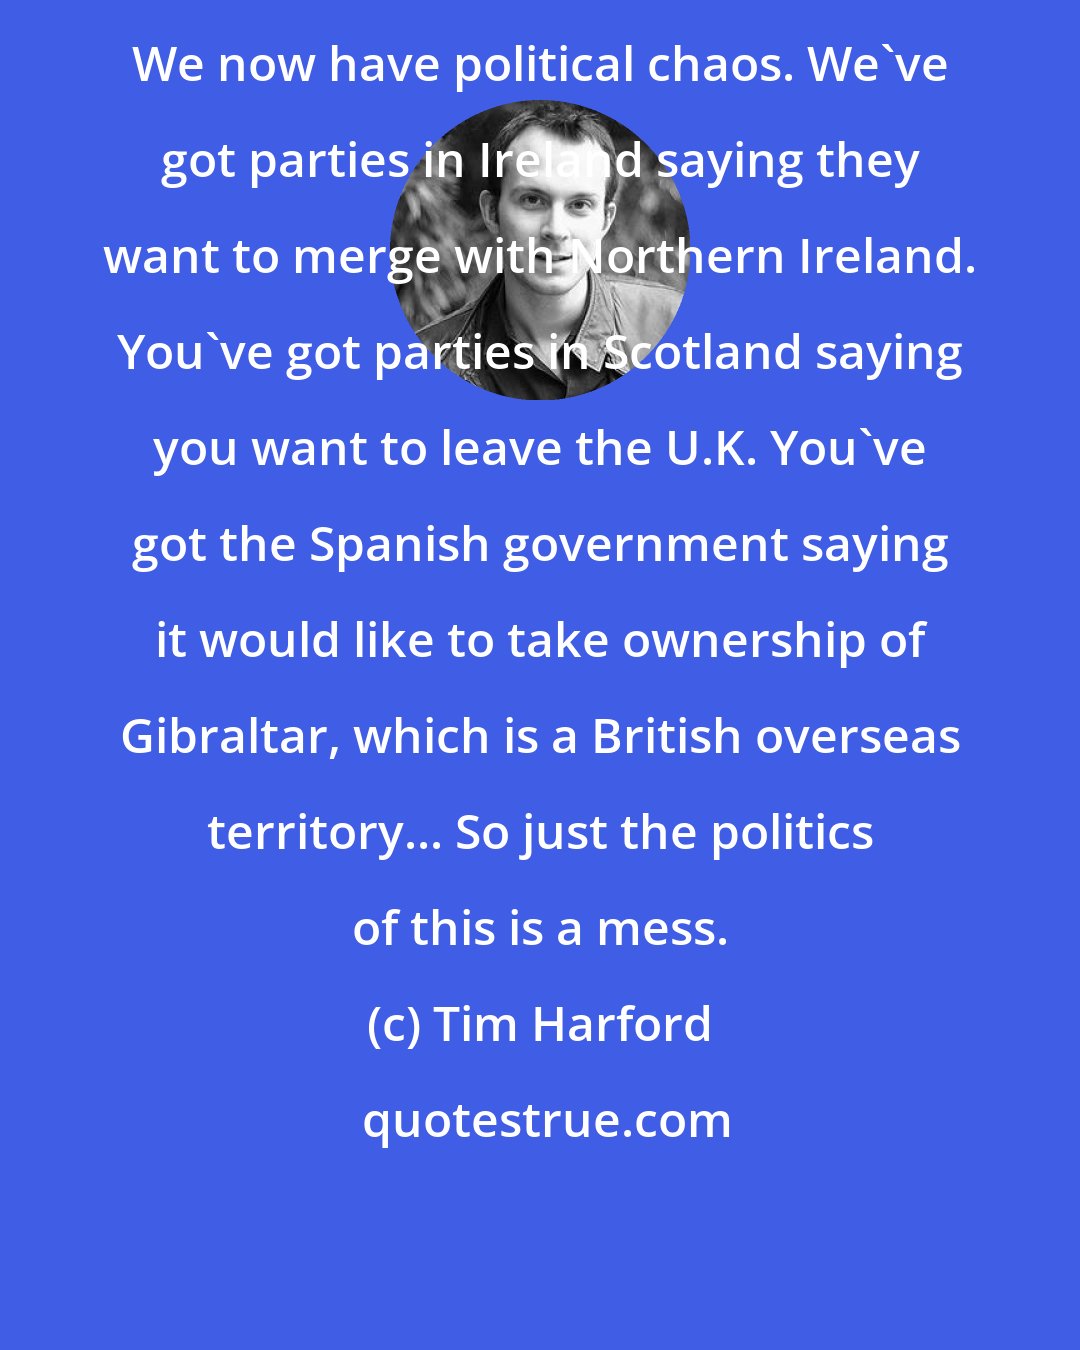 Tim Harford: We now have political chaos. We've got parties in Ireland saying they want to merge with Northern Ireland. You've got parties in Scotland saying you want to leave the U.K. You've got the Spanish government saying it would like to take ownership of Gibraltar, which is a British overseas territory... So just the politics of this is a mess.